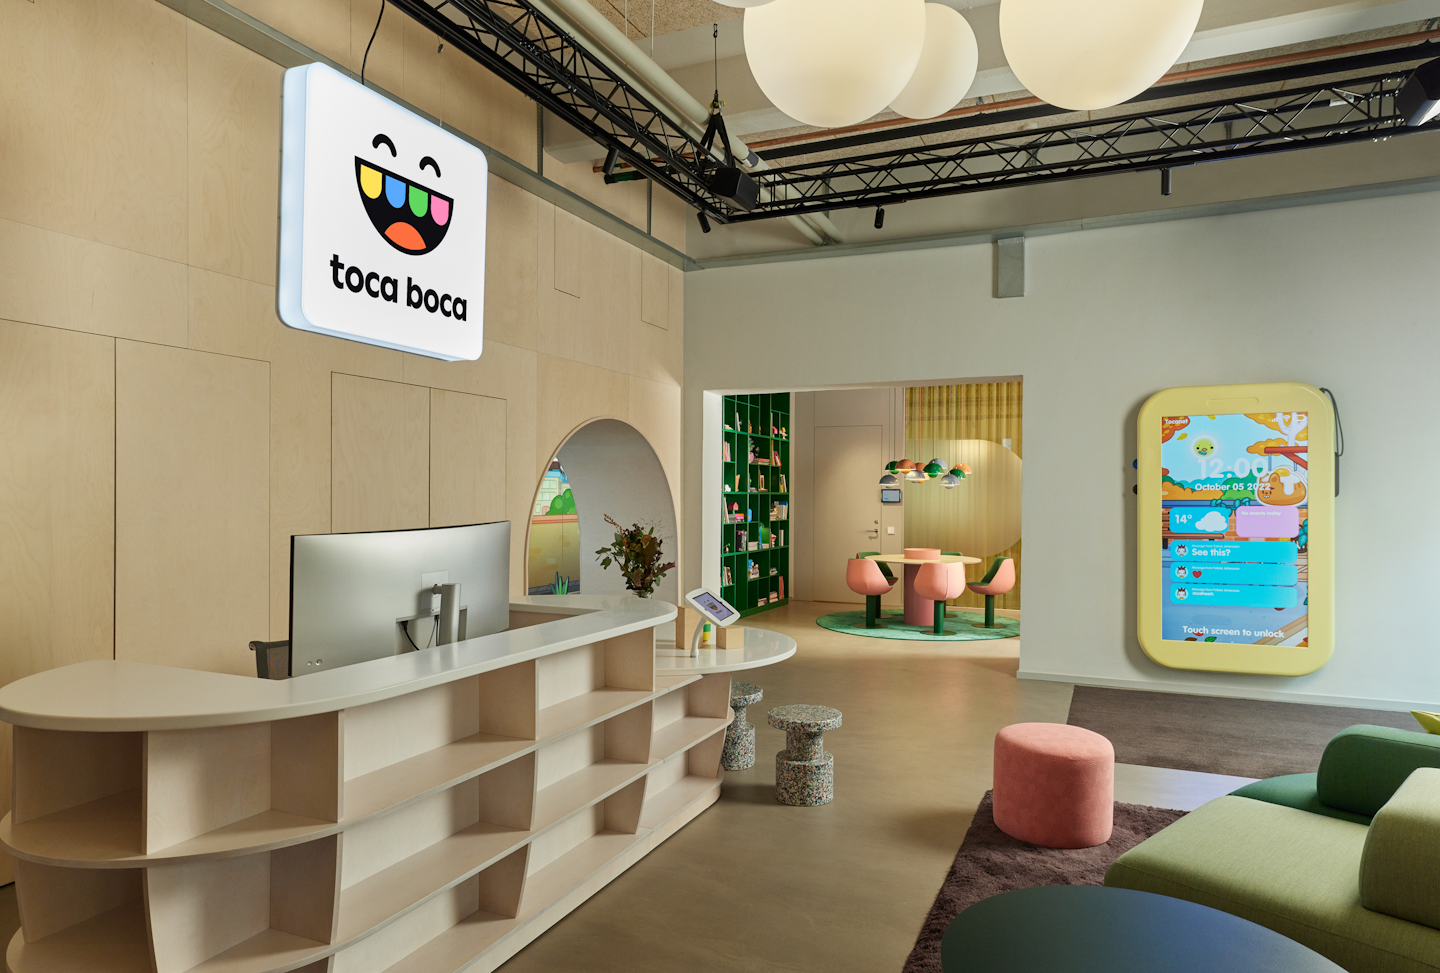 This is a photo of the entrance of Toca Boca Campus. This space is called Rob-o-cafe and there is a large phone decoration on the wall with some playful things for people to do. The Toca Boca logo is hanging above the reception desk